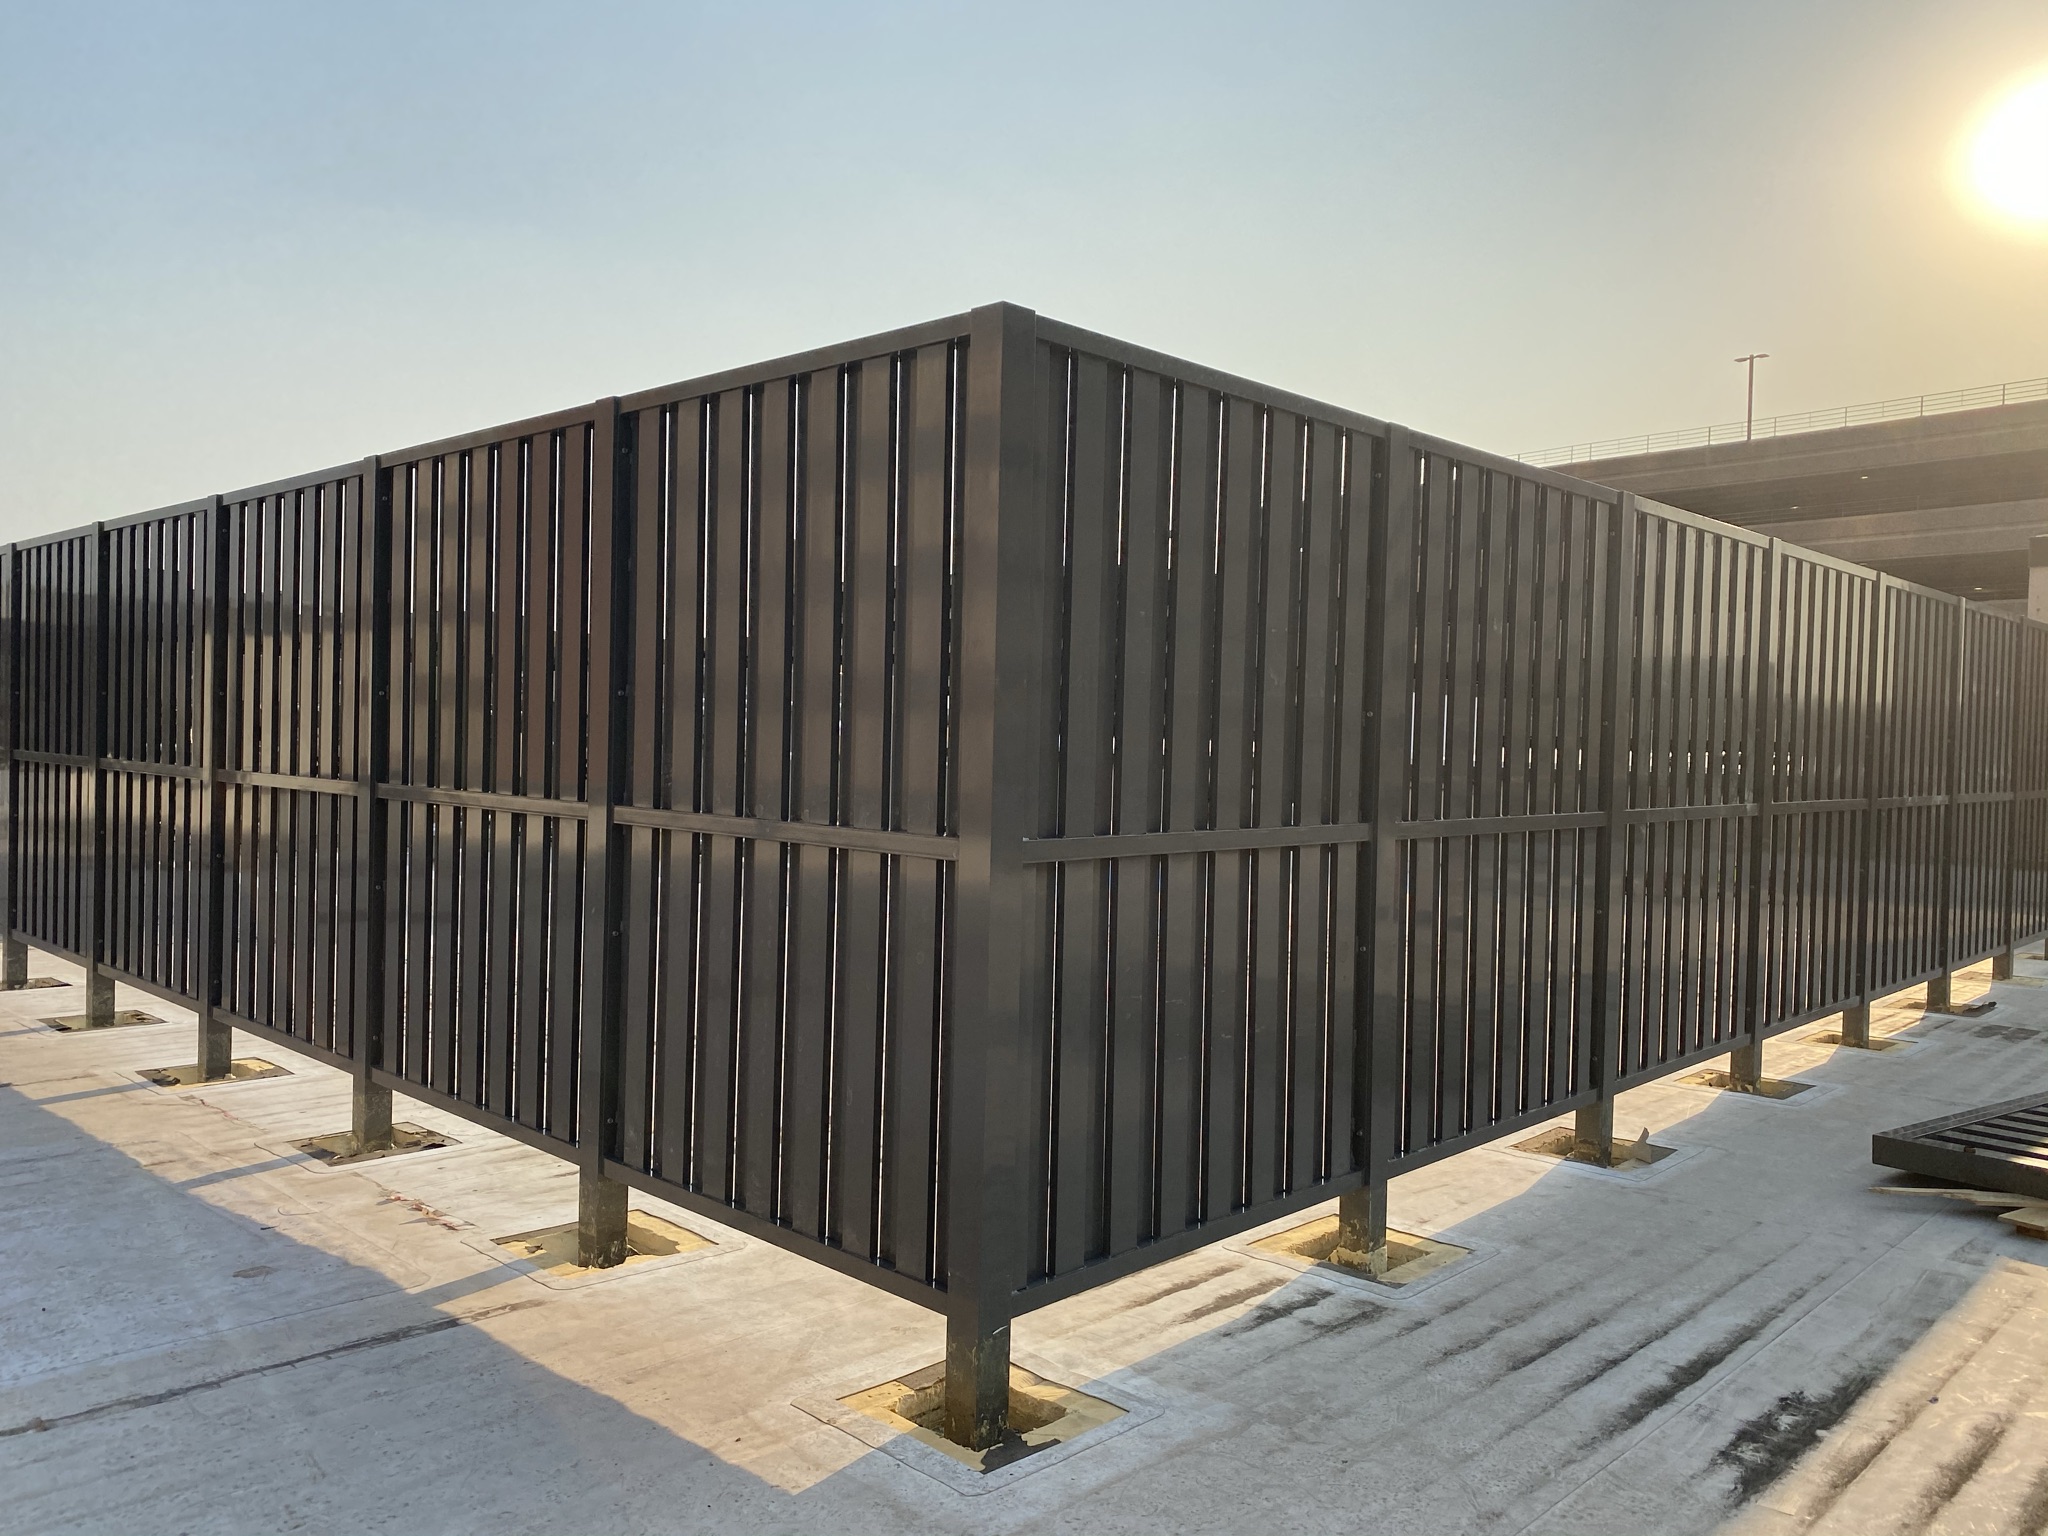 Alternating rooftop screening providing a formidable appearance with large tubular louvers running vertically or horizontally in a shadow box pattern.